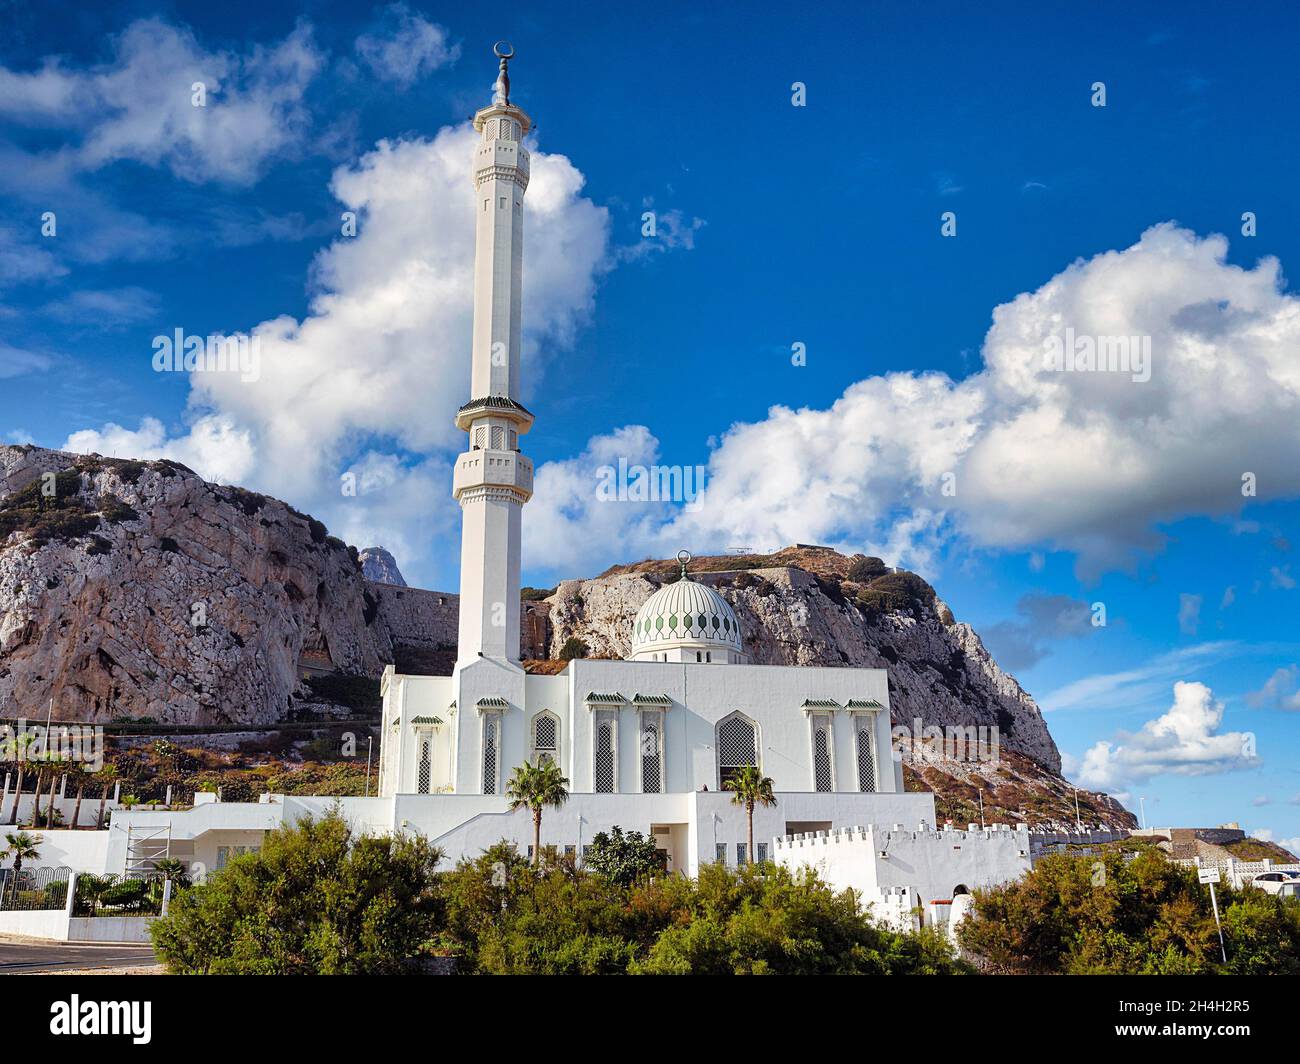 Ibrahim al Ibrahim Mosque also King Fahd bin Abdulaziz al-Saud Mosque and Mosque of the Custodian of the Two Holy Mosques, Europa Point, Gibraltar Stock Photo